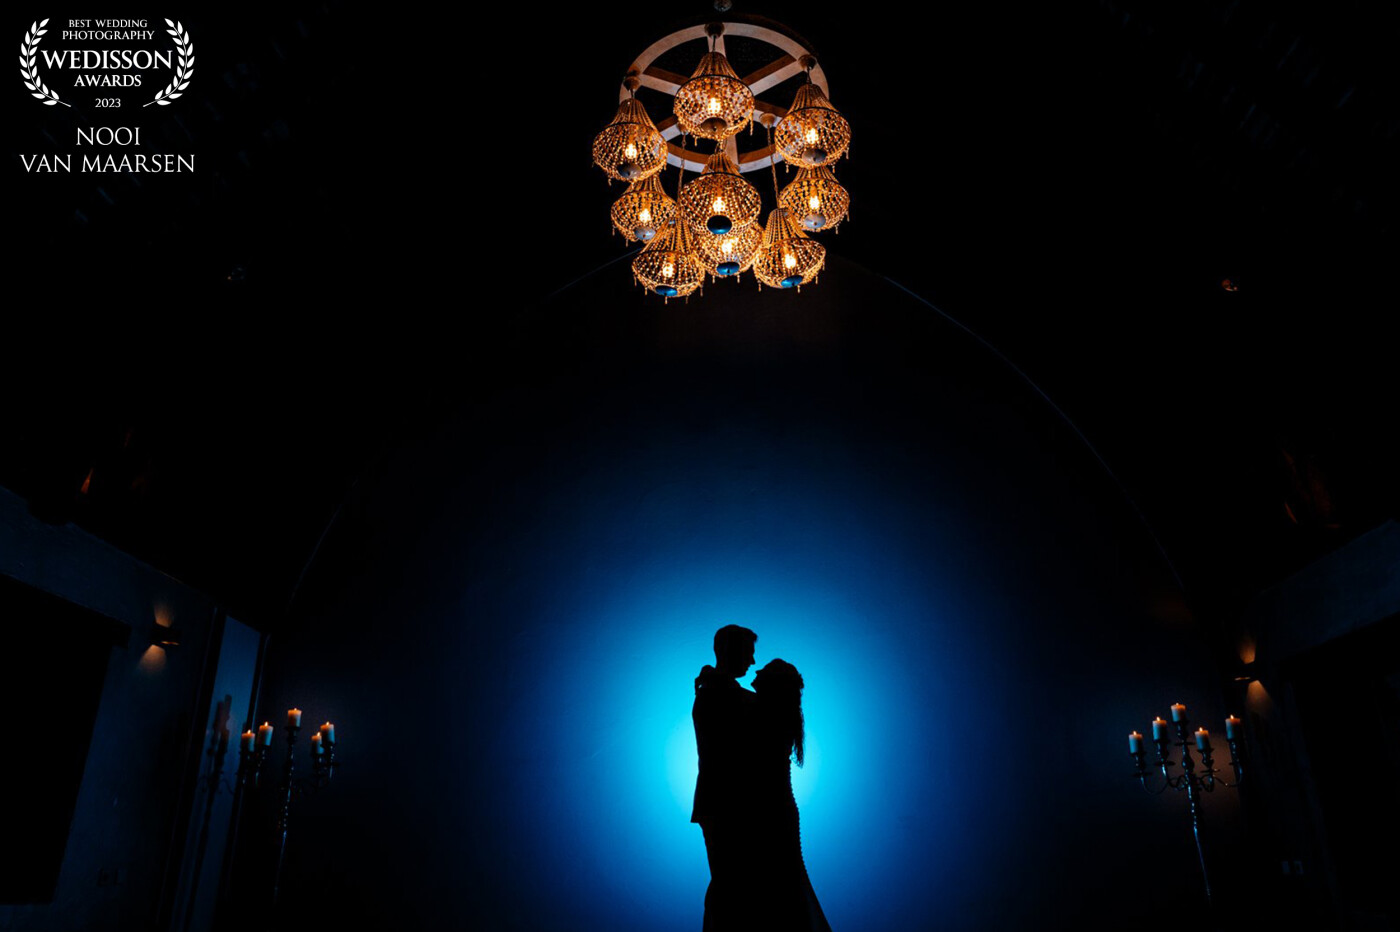 Kasteel Woerden in the Netherlands has such a beautiful chandeliers in their ceremony room. I just knew I wanted to create something special with it. The staff was already preparing for the next day but I asked them if I could borrow the room for just a few minutes. The staff even light up the candles for me. So friendly. Love how this silhouette turned out.